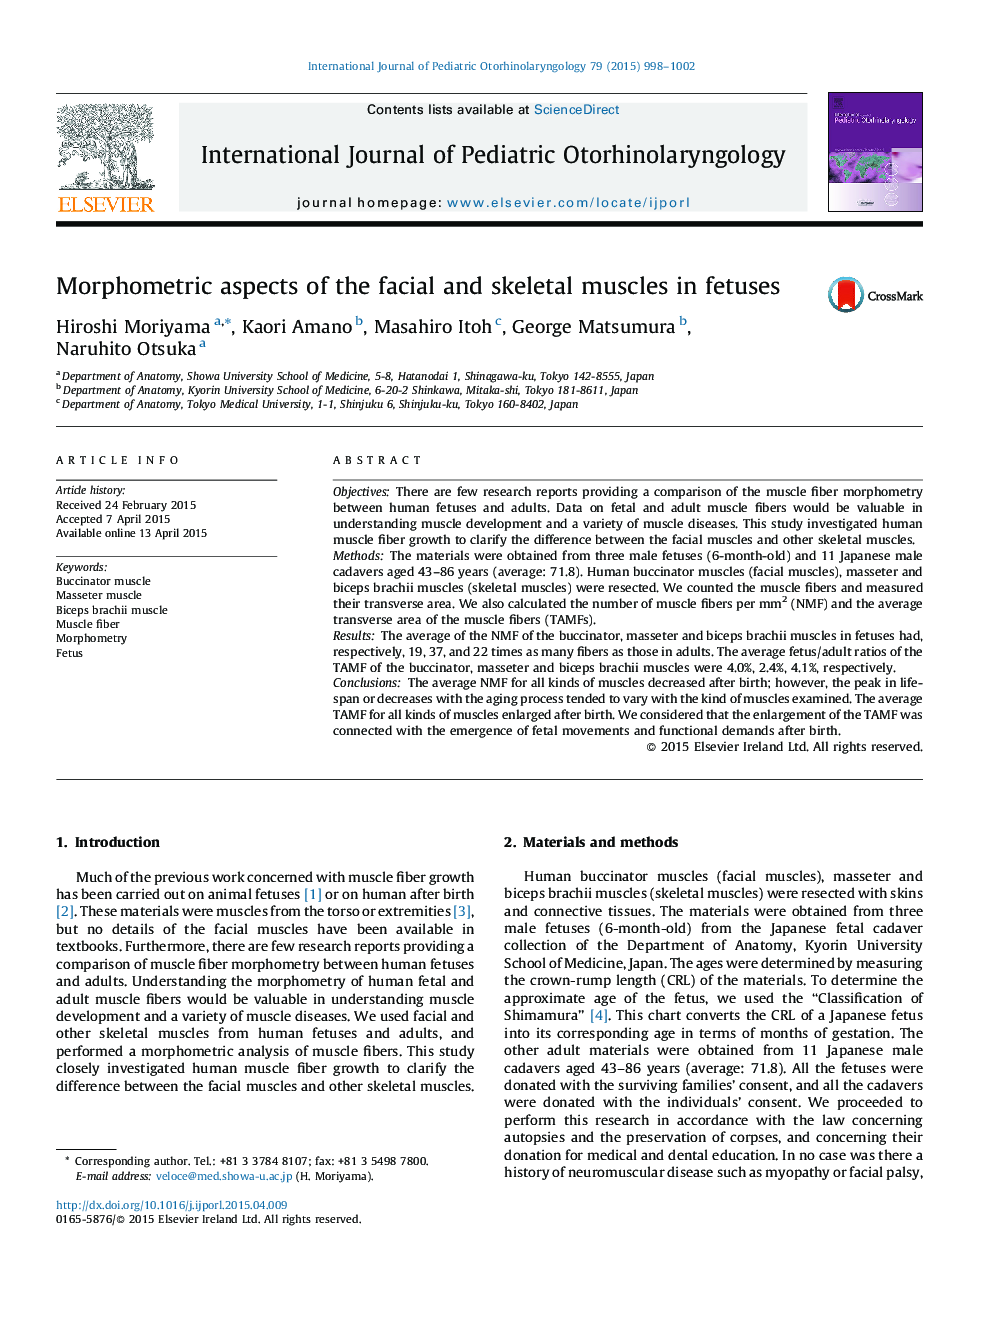 Morphometric aspects of the facial and skeletal muscles in fetuses